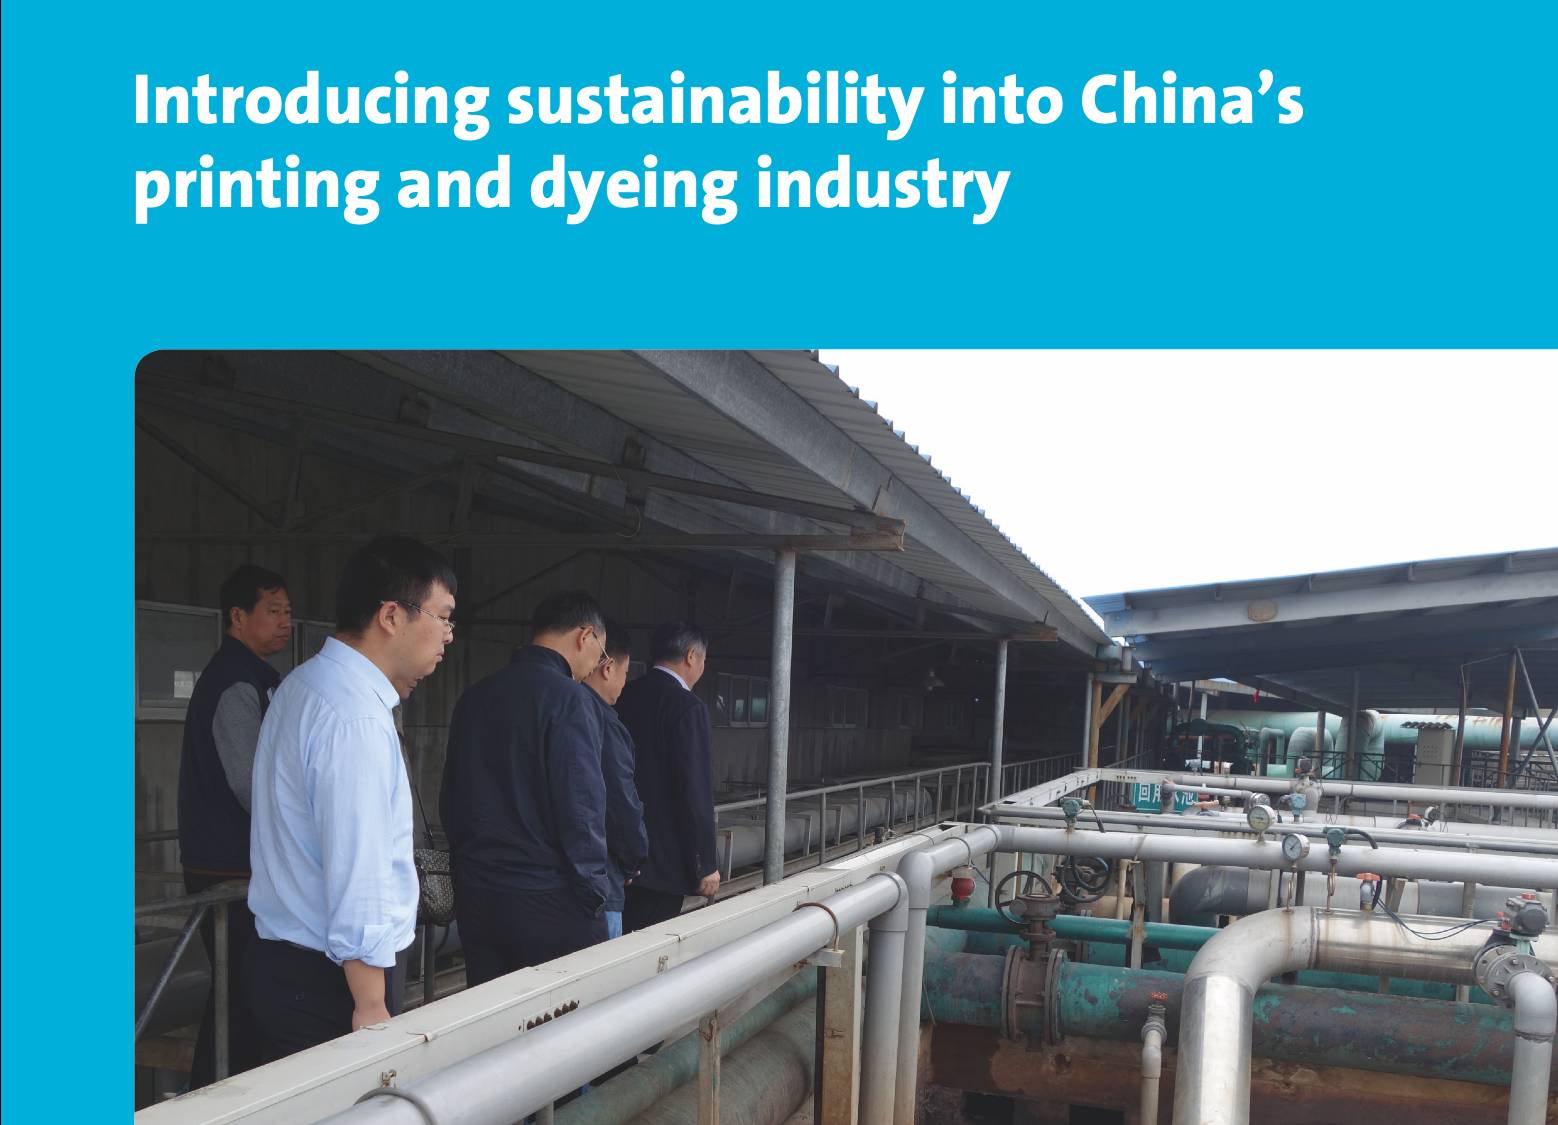 Impact Sheet: Sustainable Production in the Printing and Dyeing Sector in China